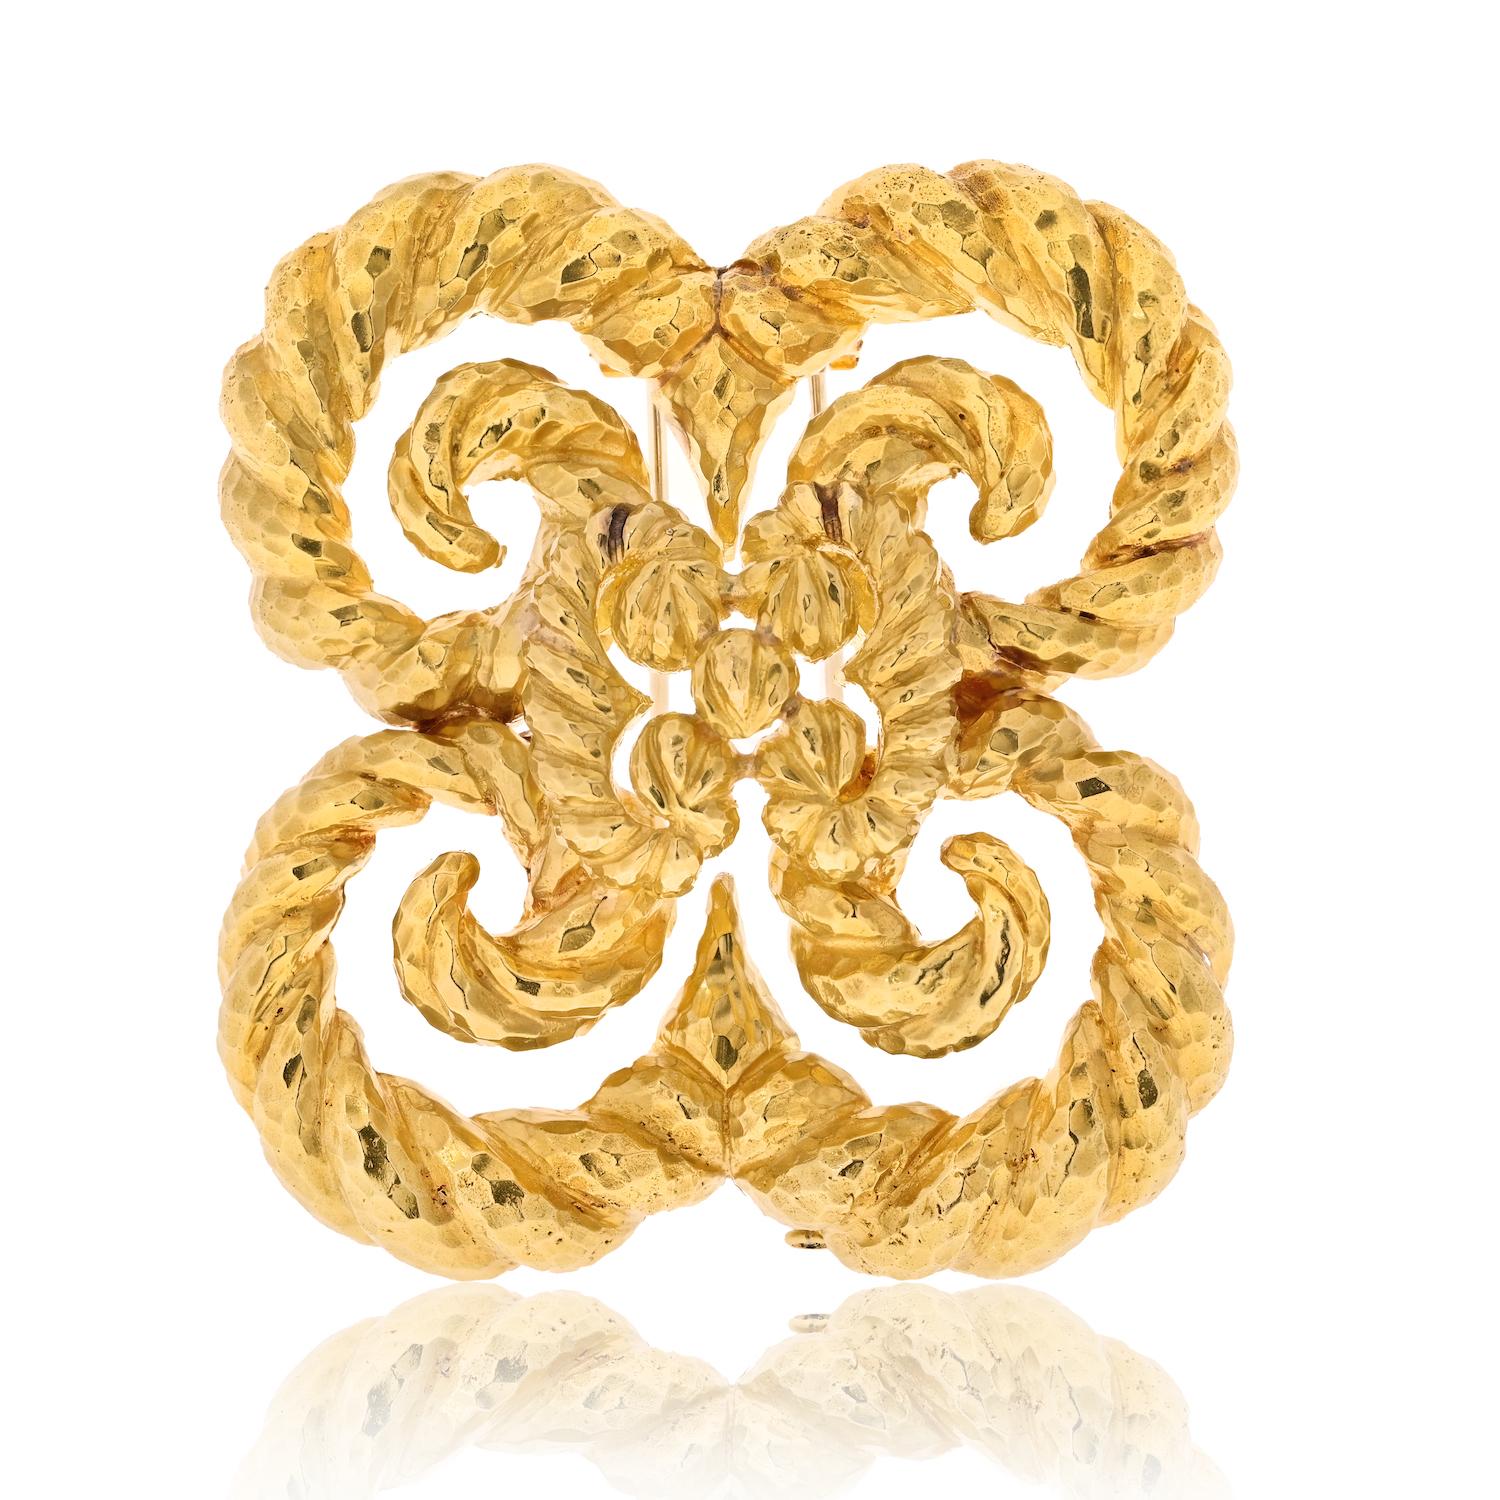 Introducing the exquisite designer brooch by David Webb, a true masterpiece in textured 18k yellow gold. This captivating brooch showcases the brand's impeccable craftsmanship and distinct design aesthetic, making it a truly remarkable